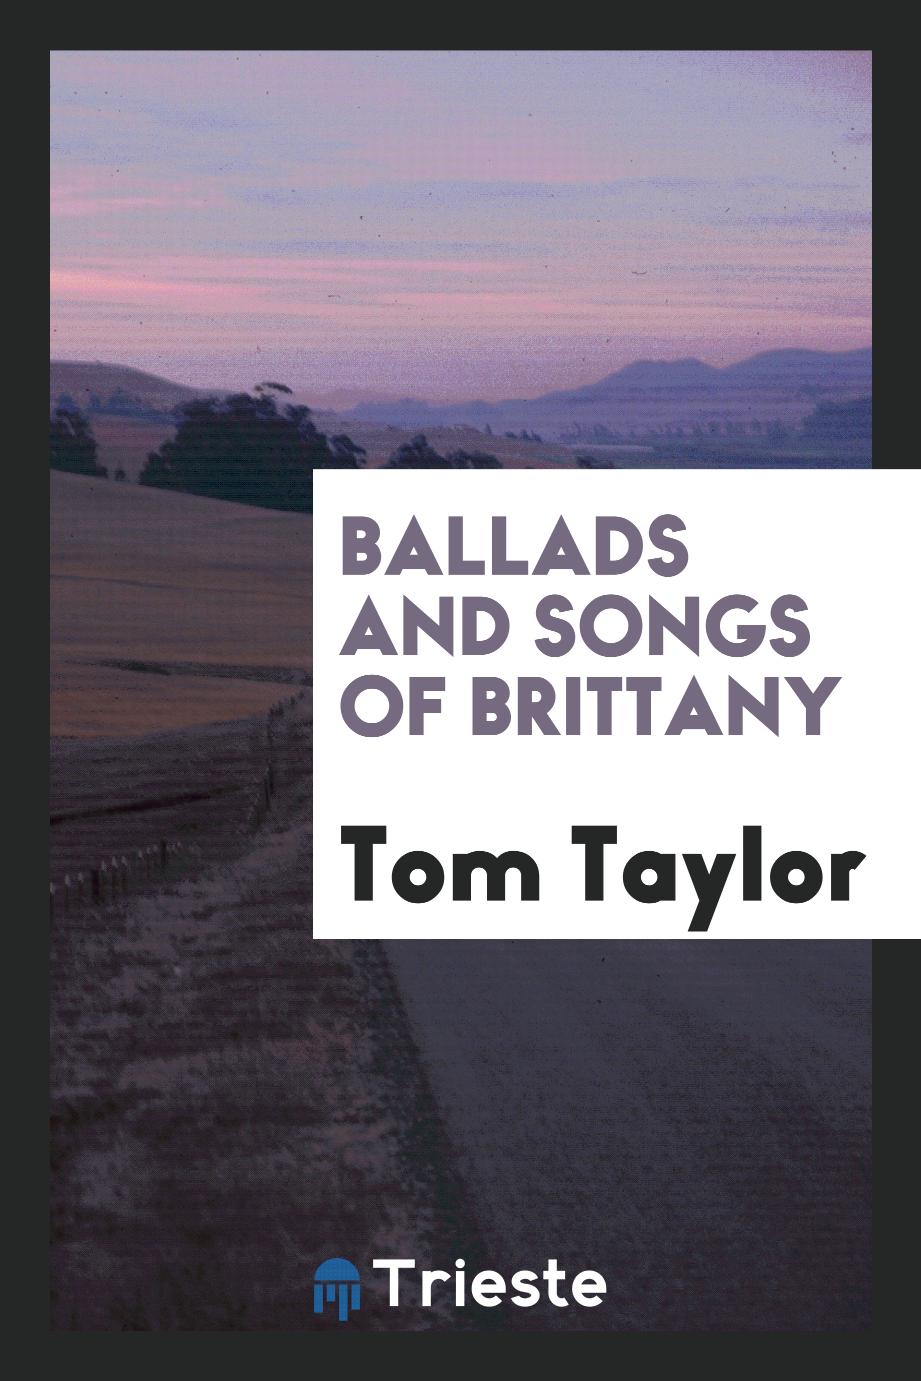 Ballads and songs of Brittany